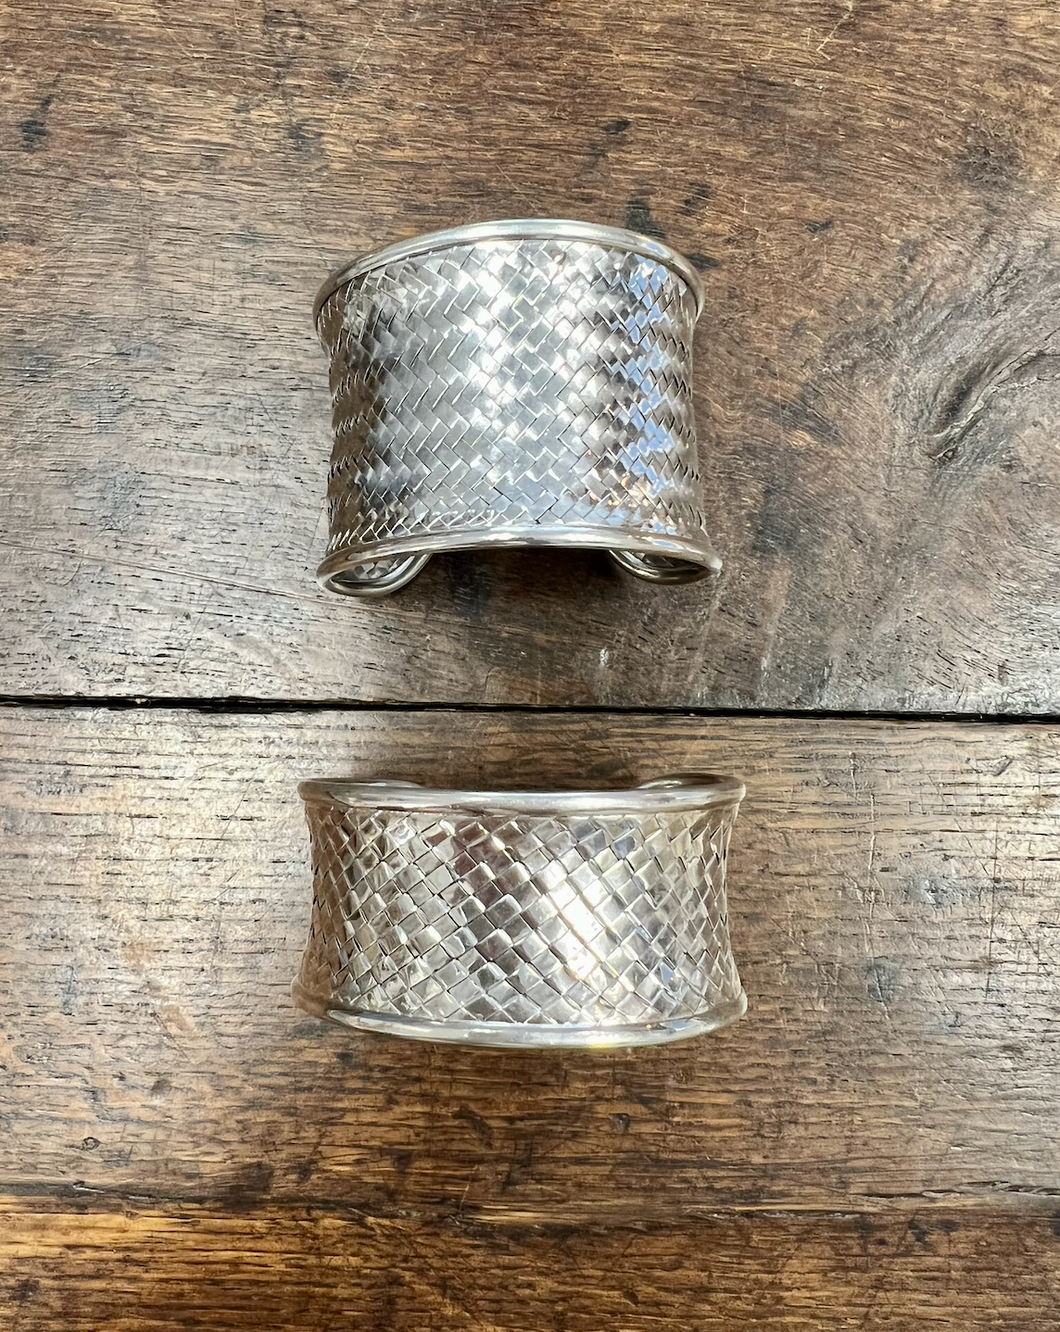 Indian sterling silver woven cuff with a solid silver surround